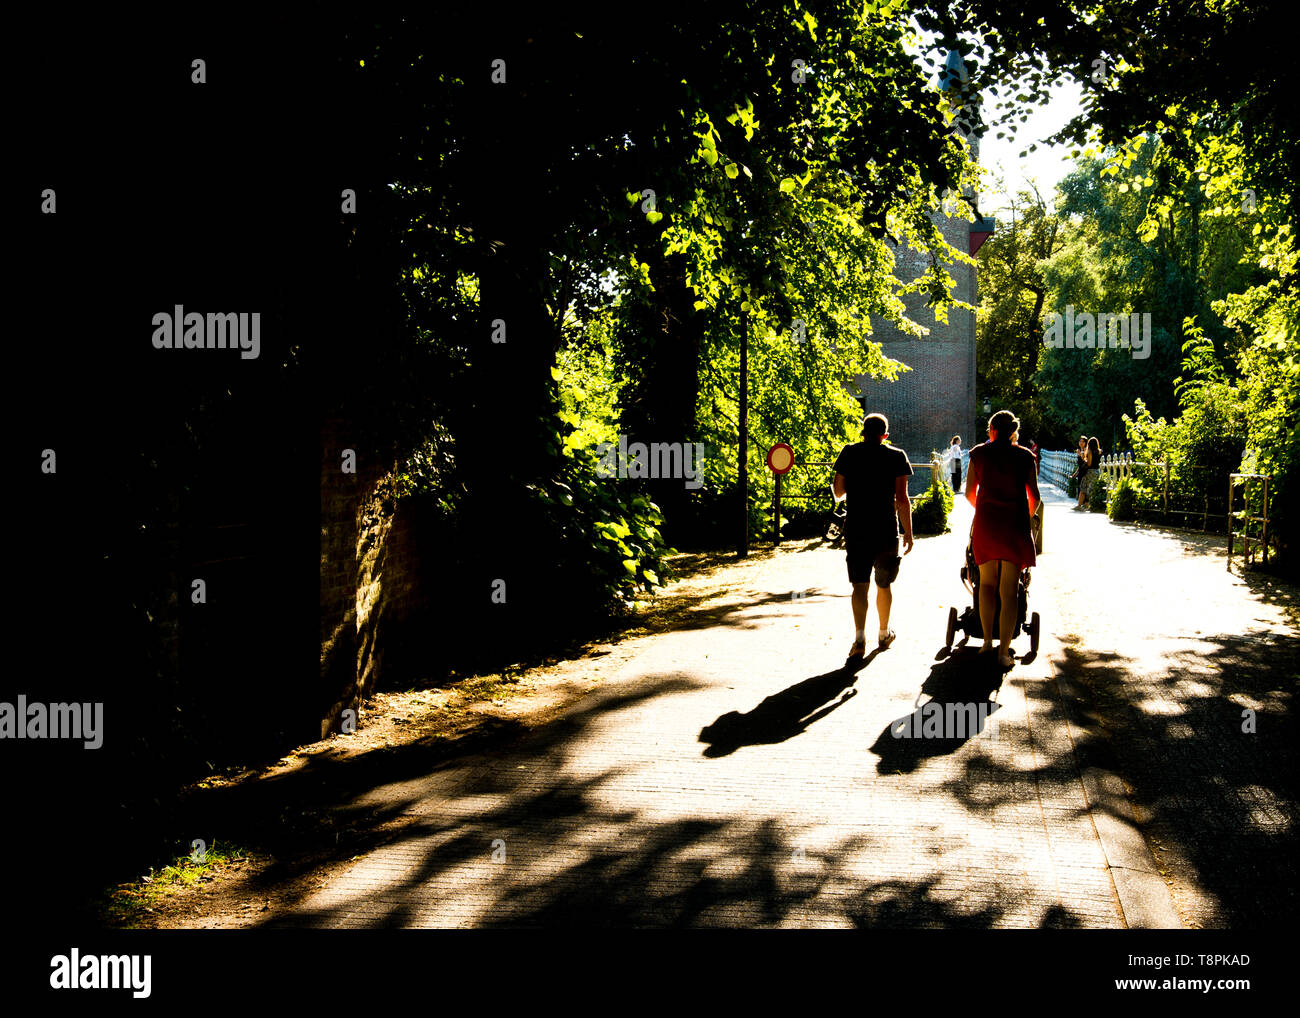 backlit image of young couple in silhouette, walking from dark shaded path, moving forward into sunlight pathway in front of them,pushing a pushchair. Stock Photo